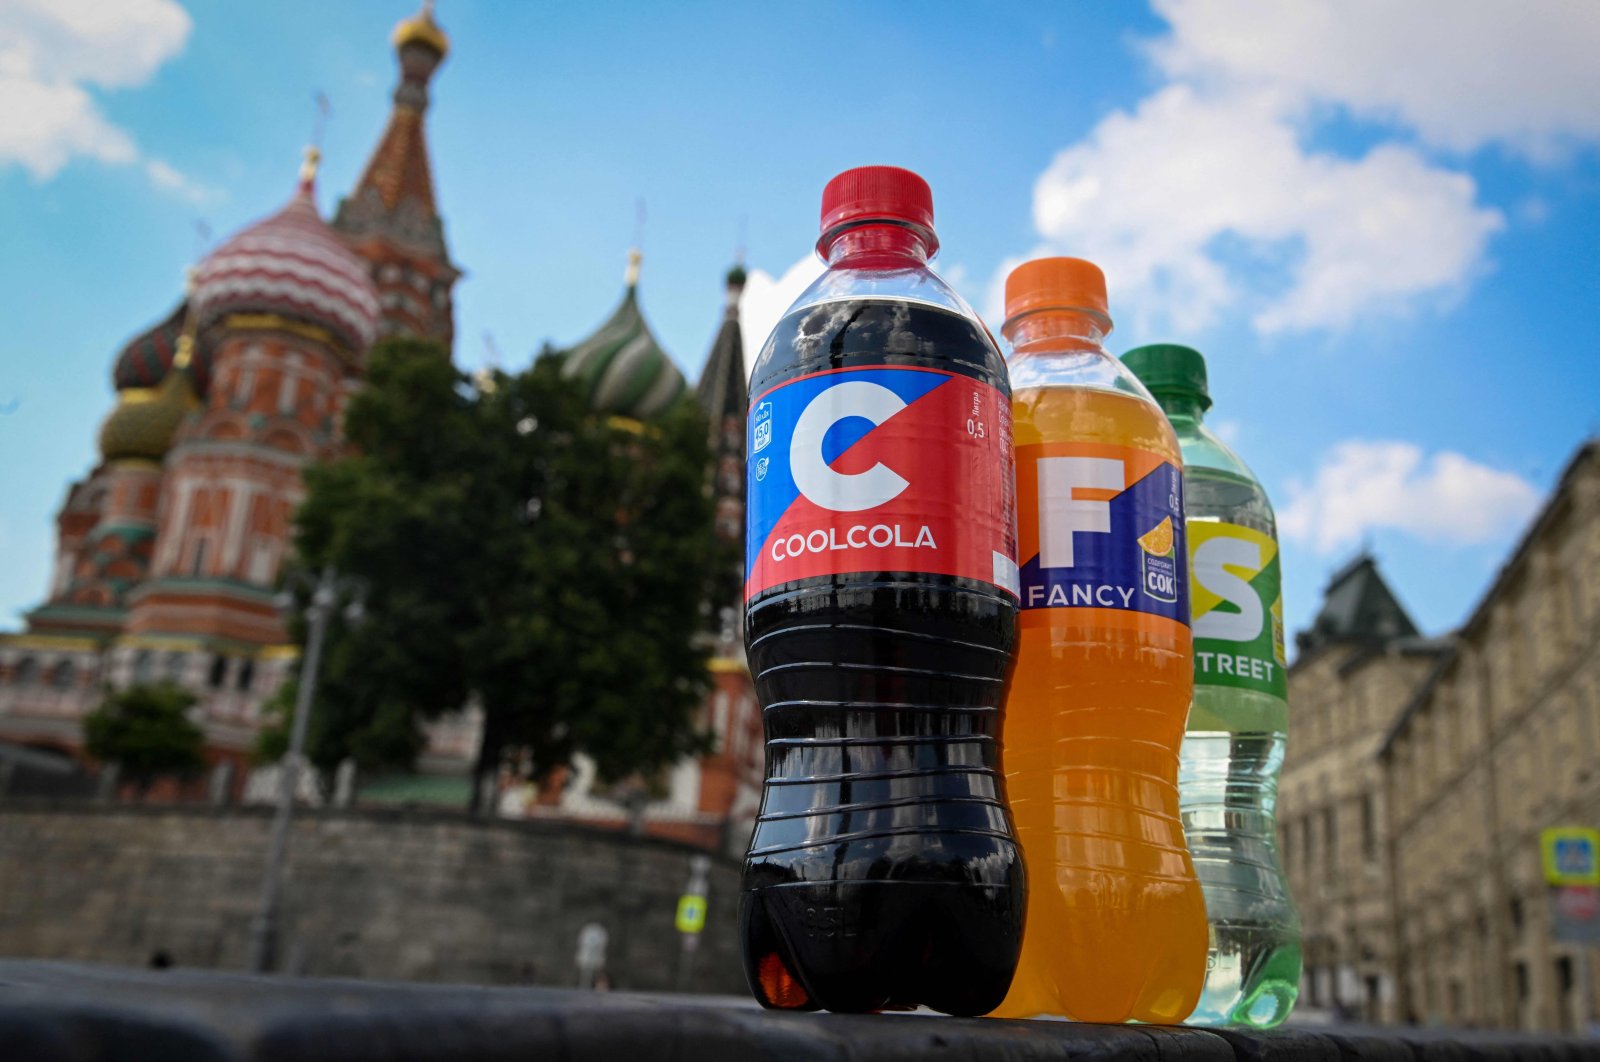 Bottles of soft drinks CoolCola, Fancy and Street, with their names and designs resembling Coca-Cola, Fanta and Sprite – the iconic brands of U.S. beverage giant Coca-Cola, are pictured in front of St. Basil&#039;s Cathedral in downtown Moscow, Russia, July 25, 2022. (AFP Photo)